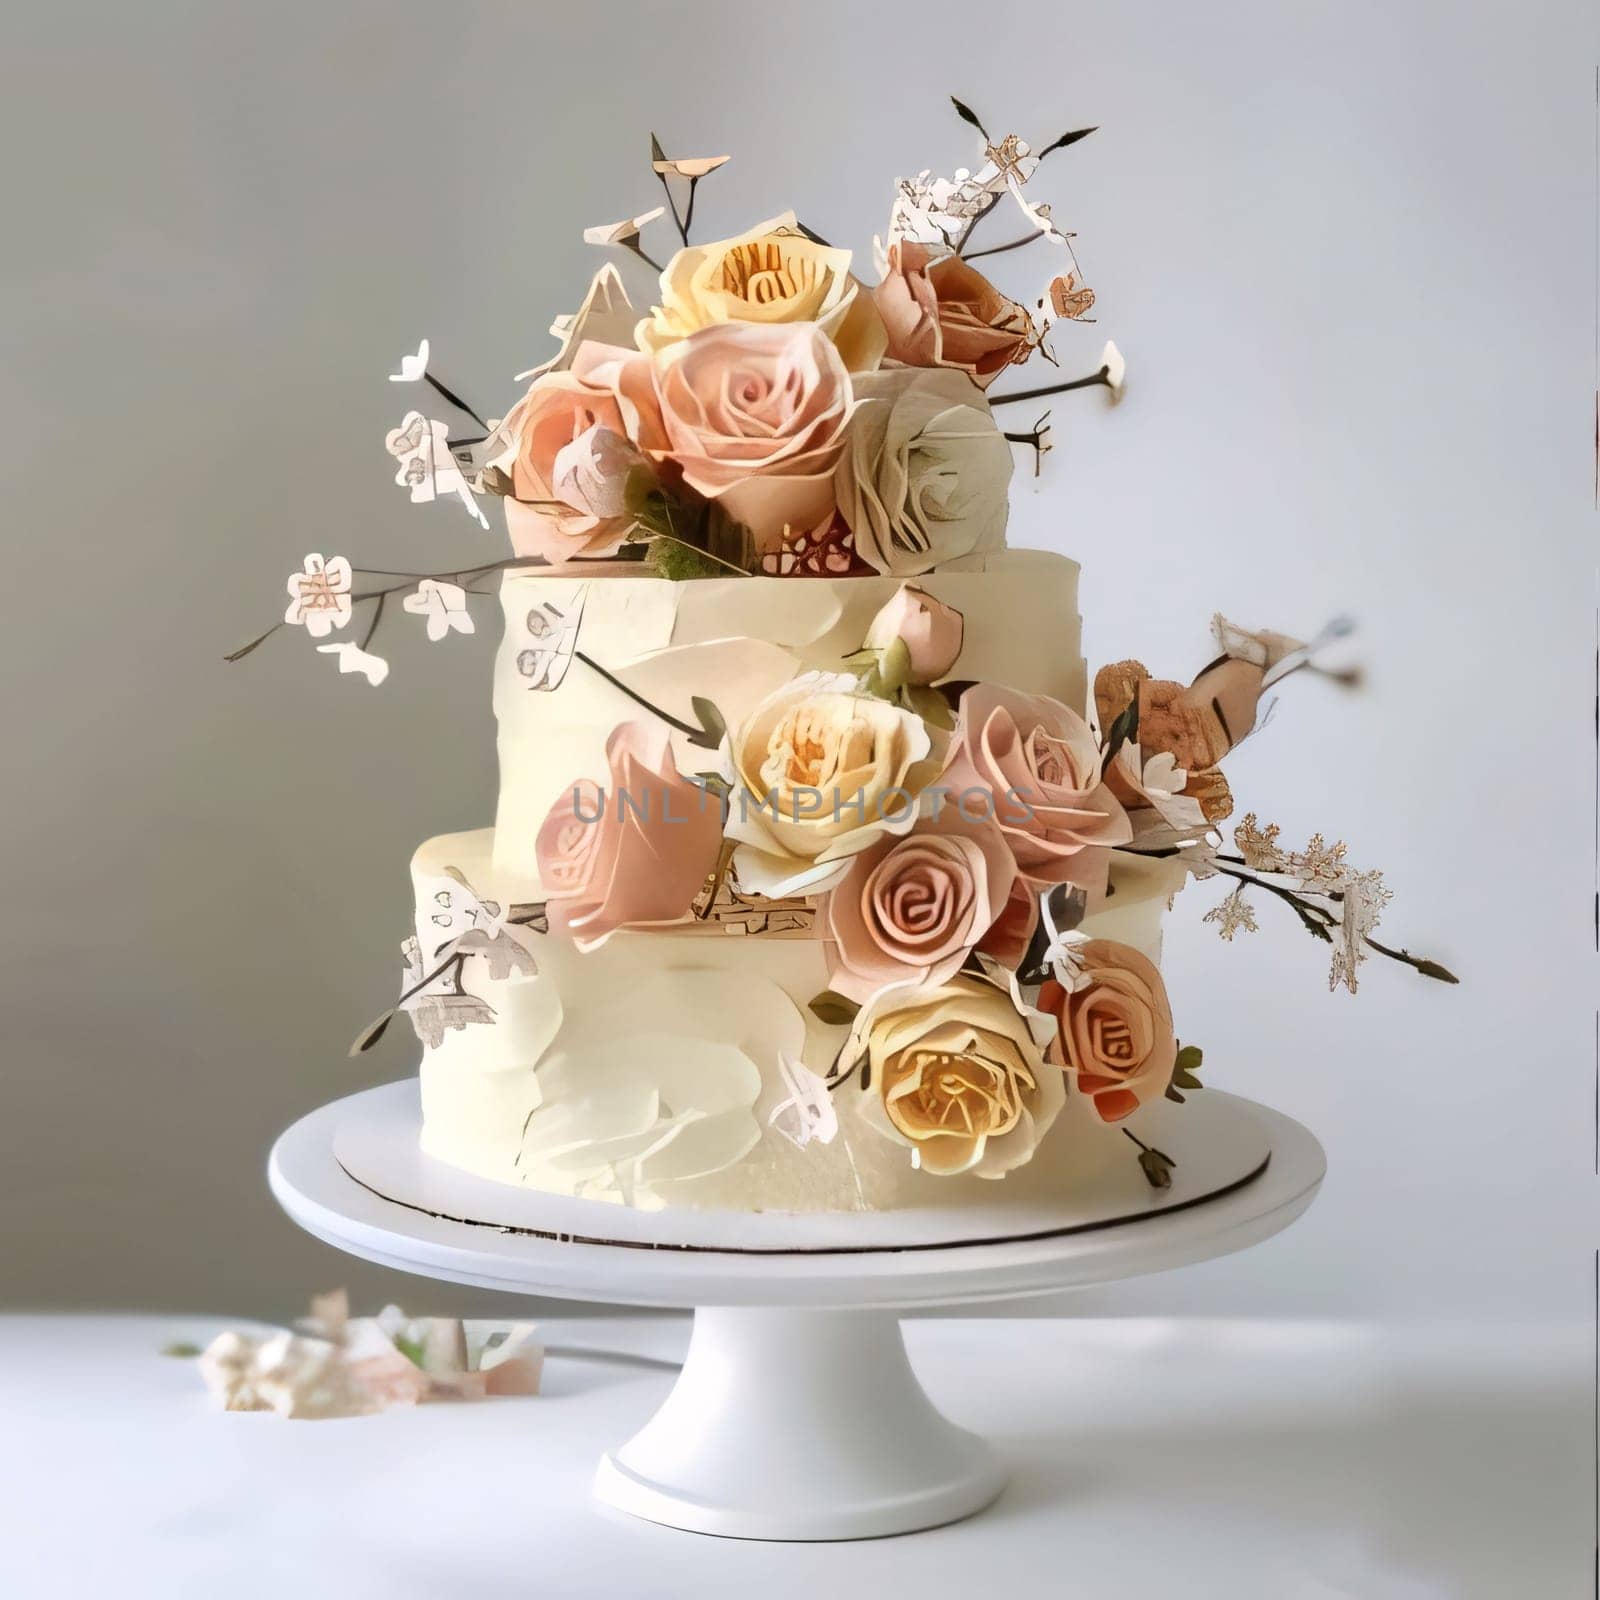 Wedding cake with flowers roses on a white stand, light background. Flowering flowers, a symbol of spring, new life. by ThemesS